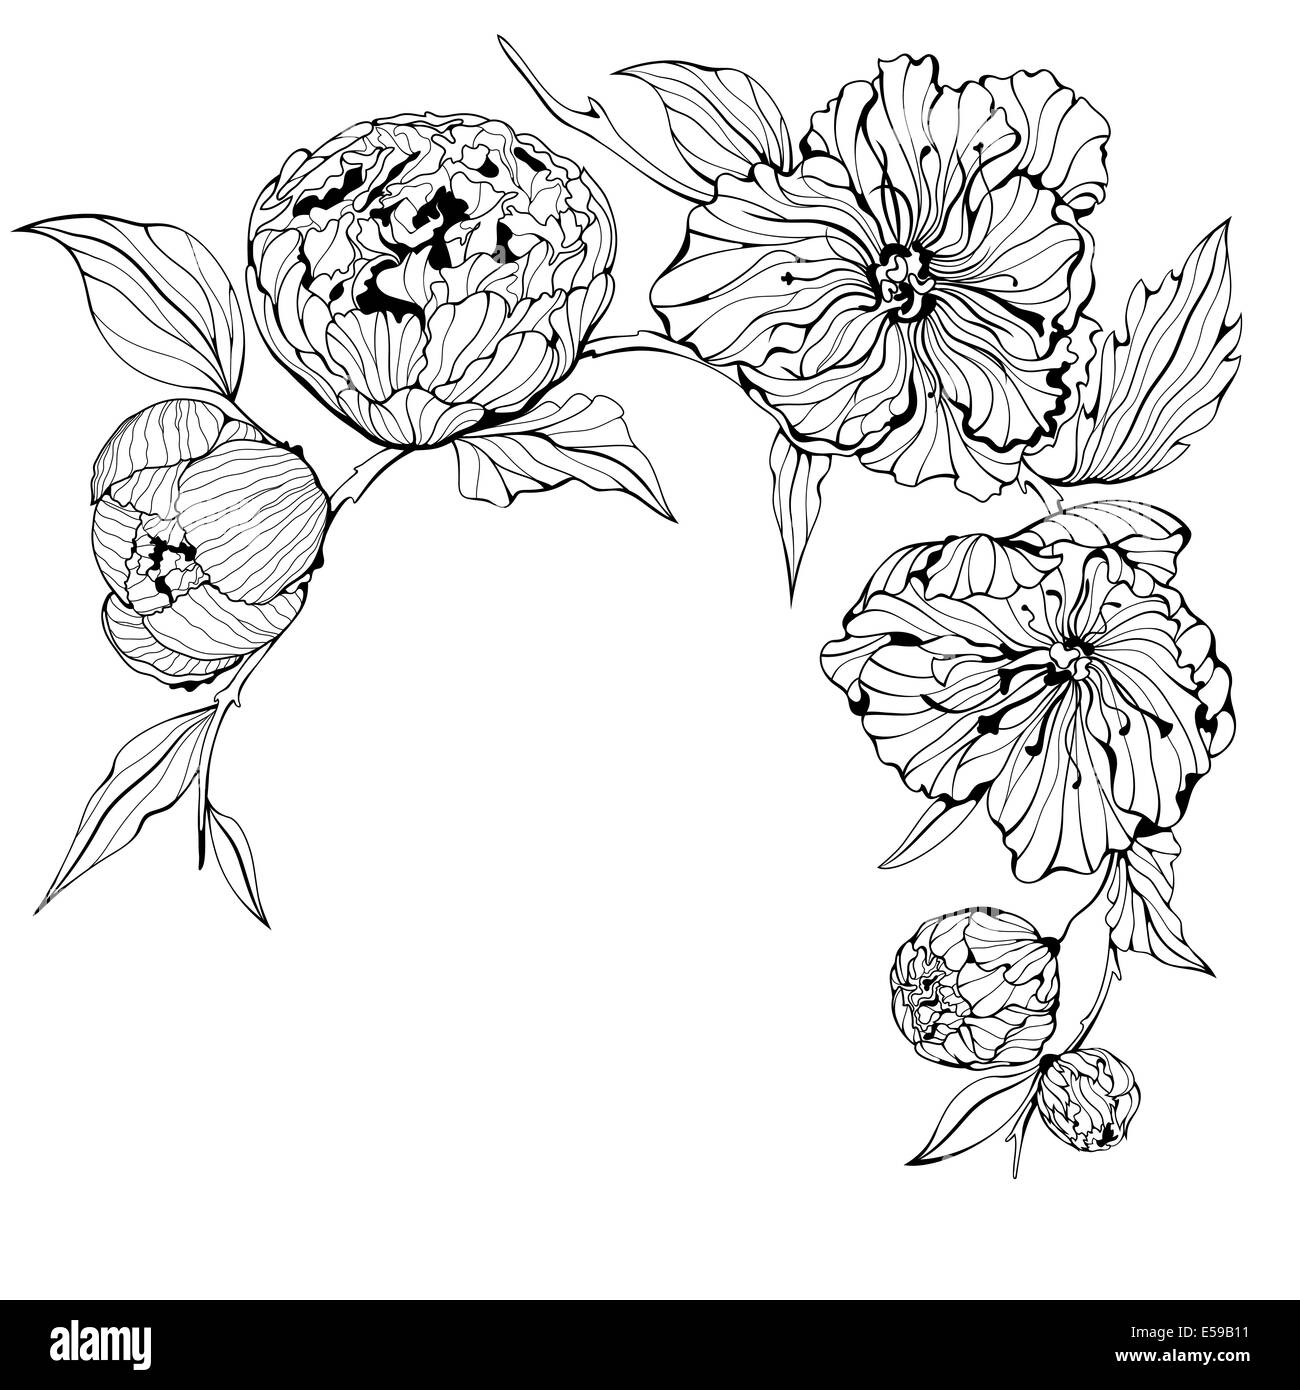 Black and white background with gentle peony flowers Stock Photo